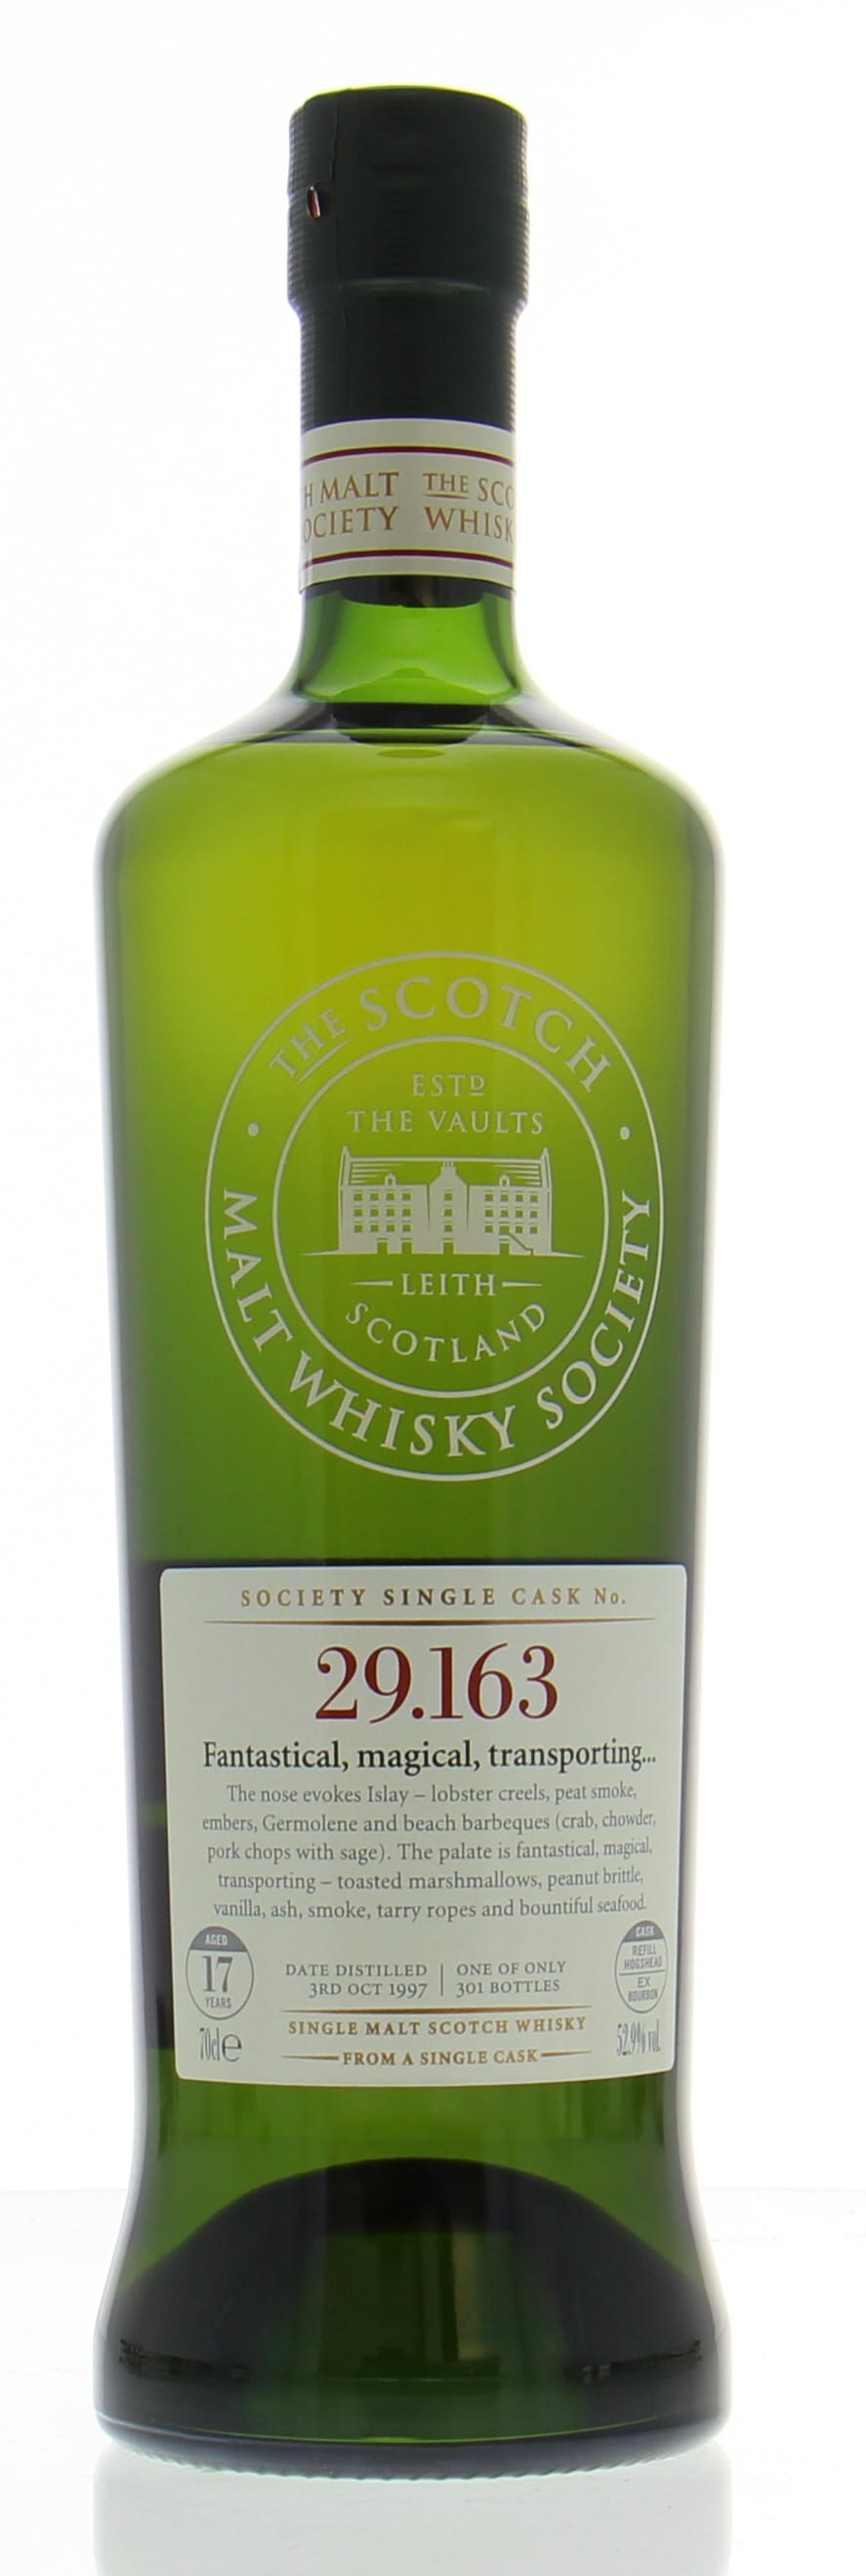 Laphroaig - 17 Years Old SMWS 29.163 Fantastical, magical, transporting...1 Of 301 Bottles 52.9% 1997 Perfect